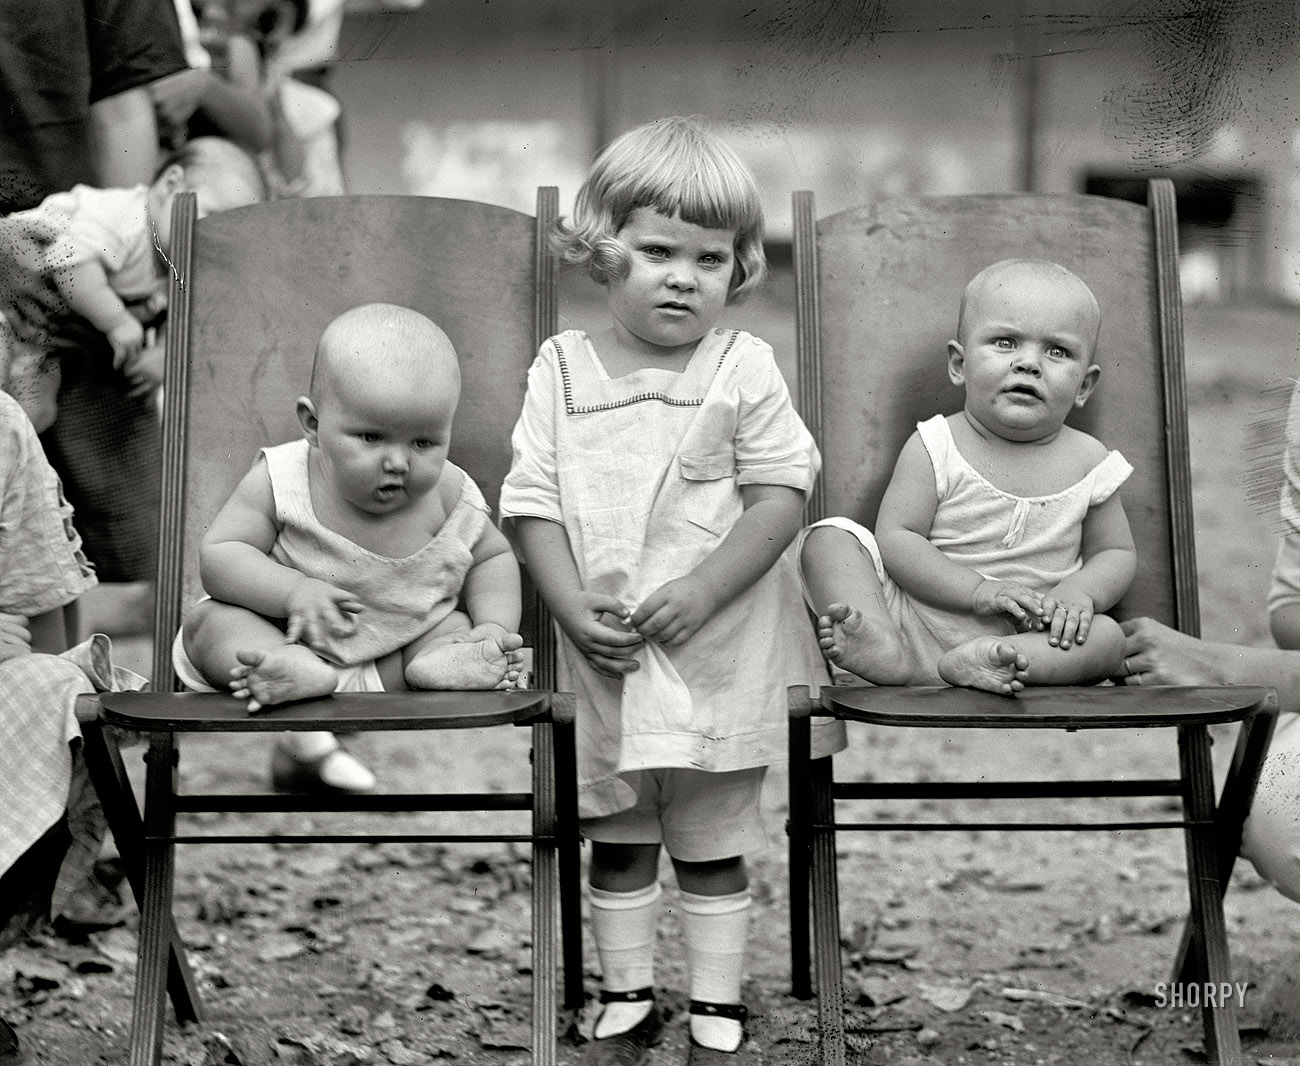 September 7, 1922. Washington, D.C. "Playground baby show."  National Photo Company Collection glass negative. View full size.